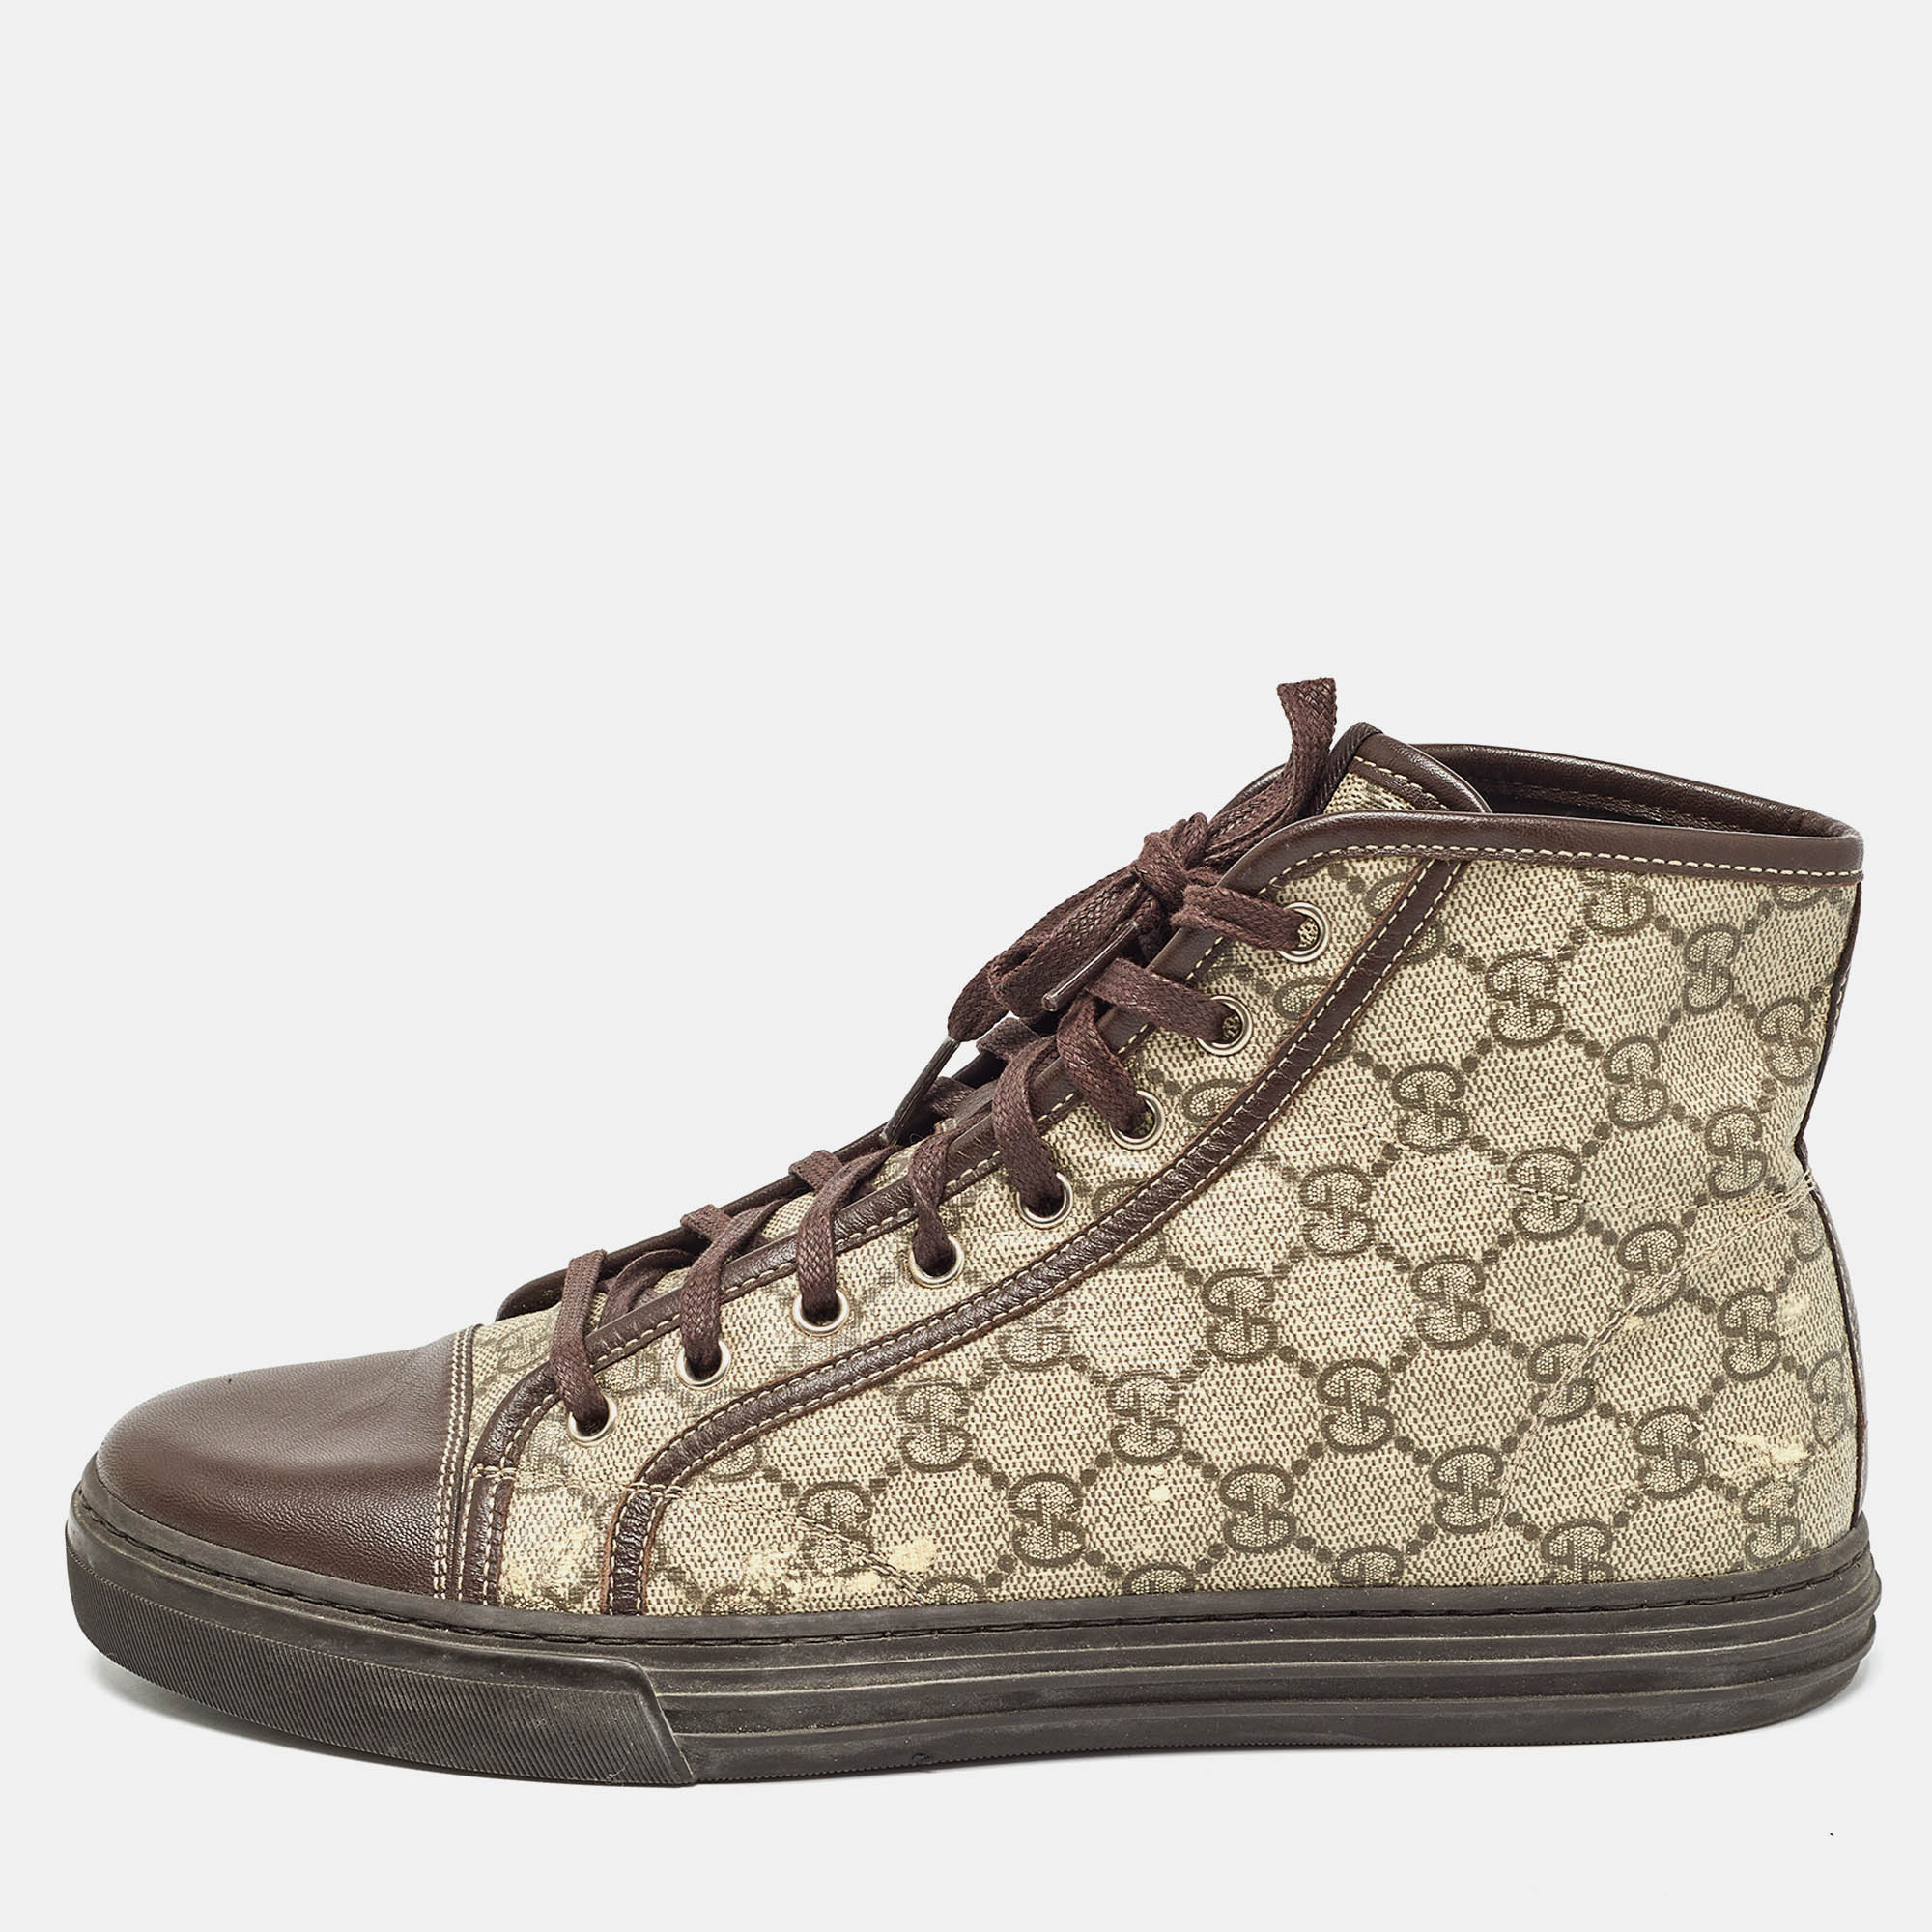 

Gucci Beige/Brown GG Supreme Canvas and Leather High Top Sneakers Size